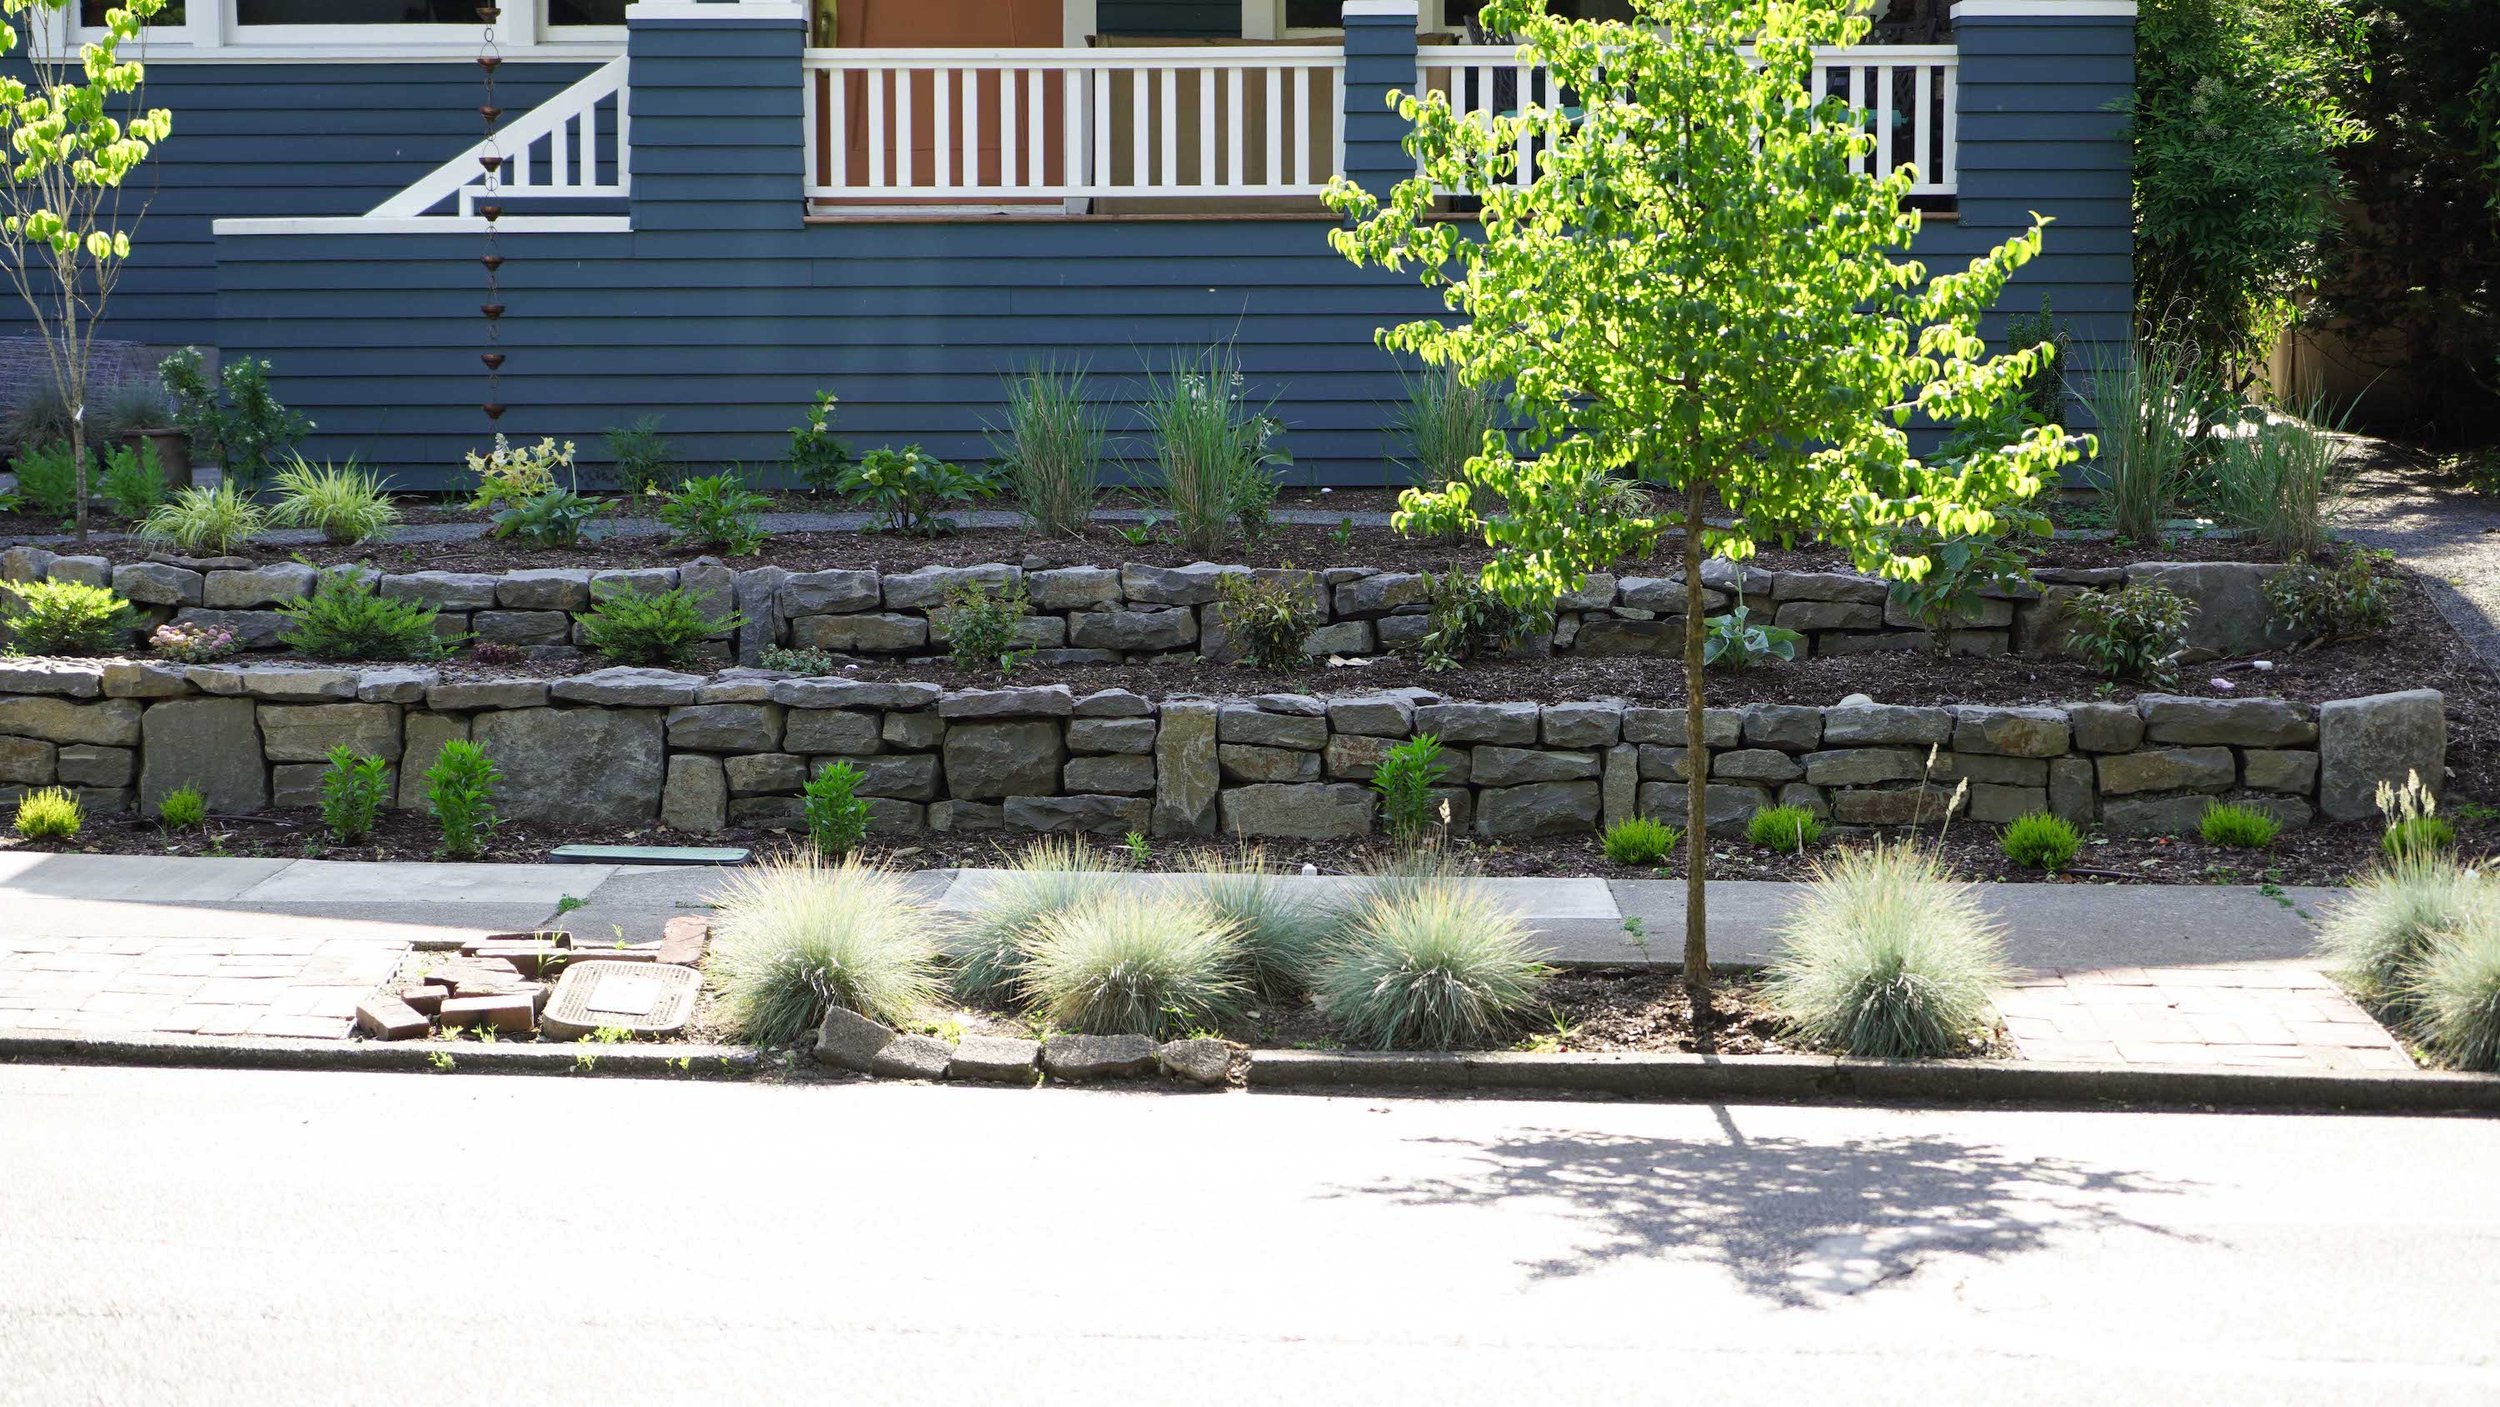 Natural Stone Retaining Wall - Grasstains Landscaping